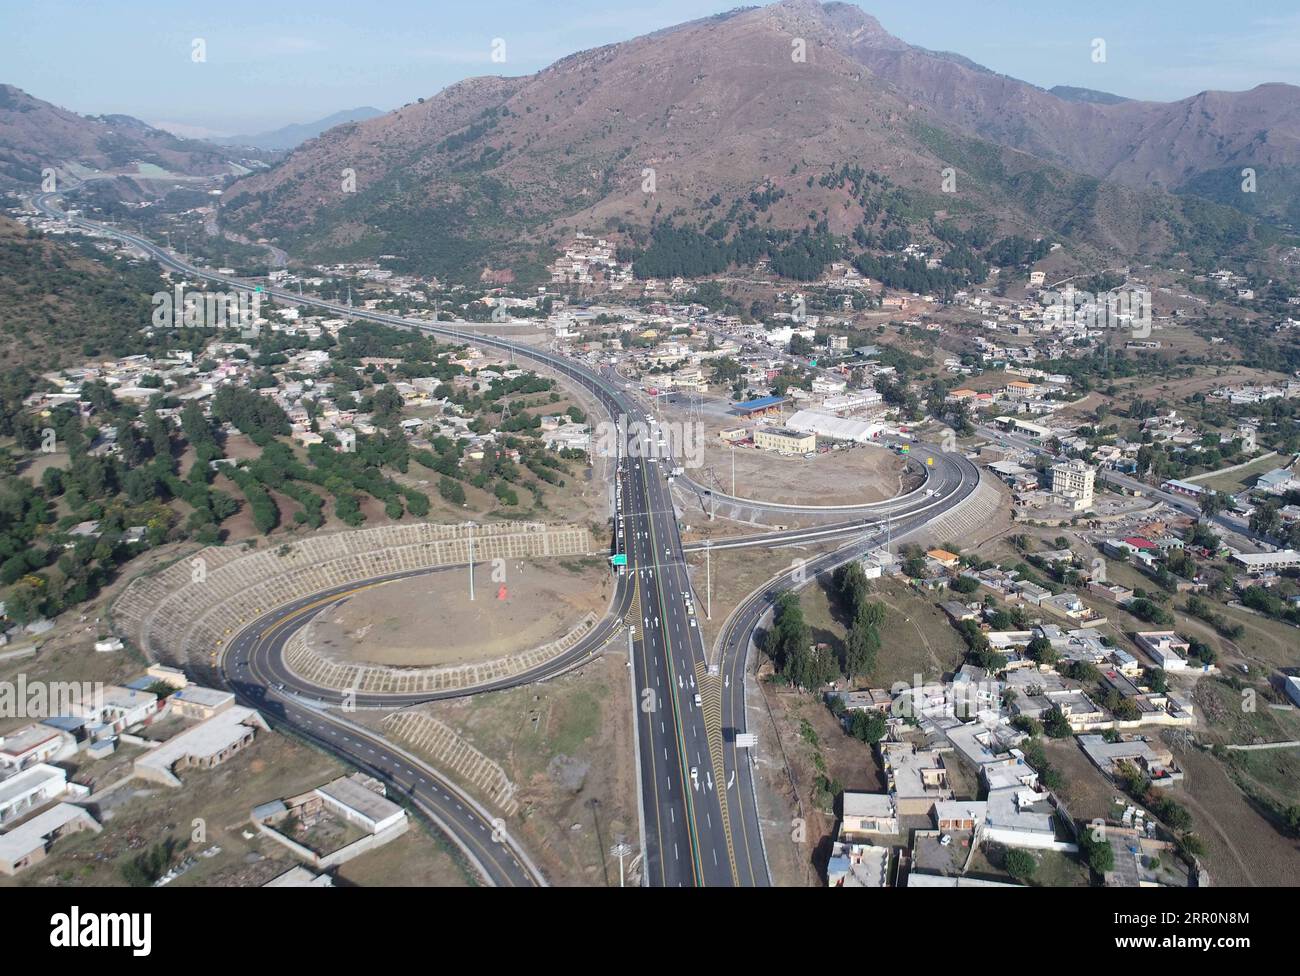 200821 -- ISLAMABAD, Aug. 21, 2020 -- Photo taken on Nov. 18, 2019 shows the expressway section from Havelian to Mansehra under the Karakoram Highway KKH Phase Two project in Pakistan s northwest Khyber Pakhtunkhwa province. TO GO WITH XINHUA HEADLINES OF AUG. 21, 2020.  PAKISTAN-CHINA-KARAKORAM HIGHWAY-PHASE TWO PROJECT LiuxTian PUBLICATIONxNOTxINxCHN Stock Photo